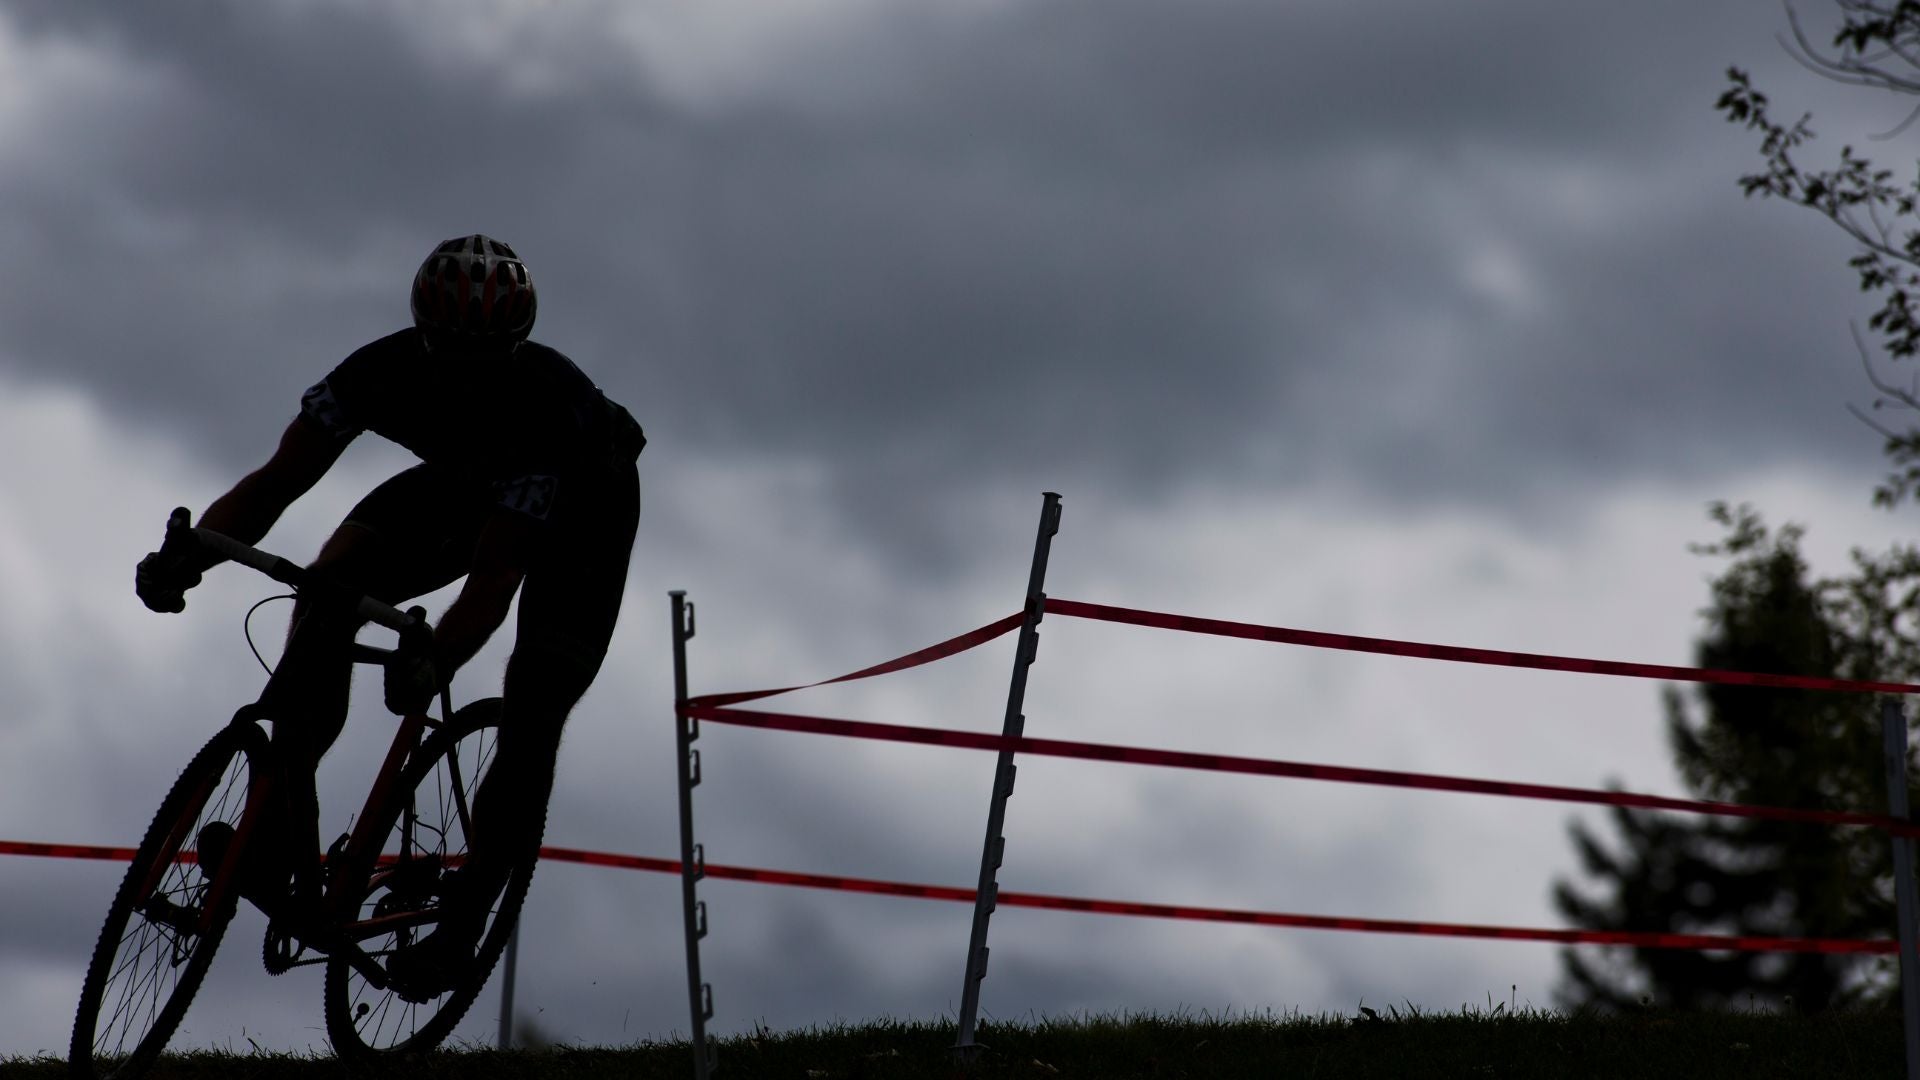 cyclocross racer navigates a turn on their bike in front of dark clouds